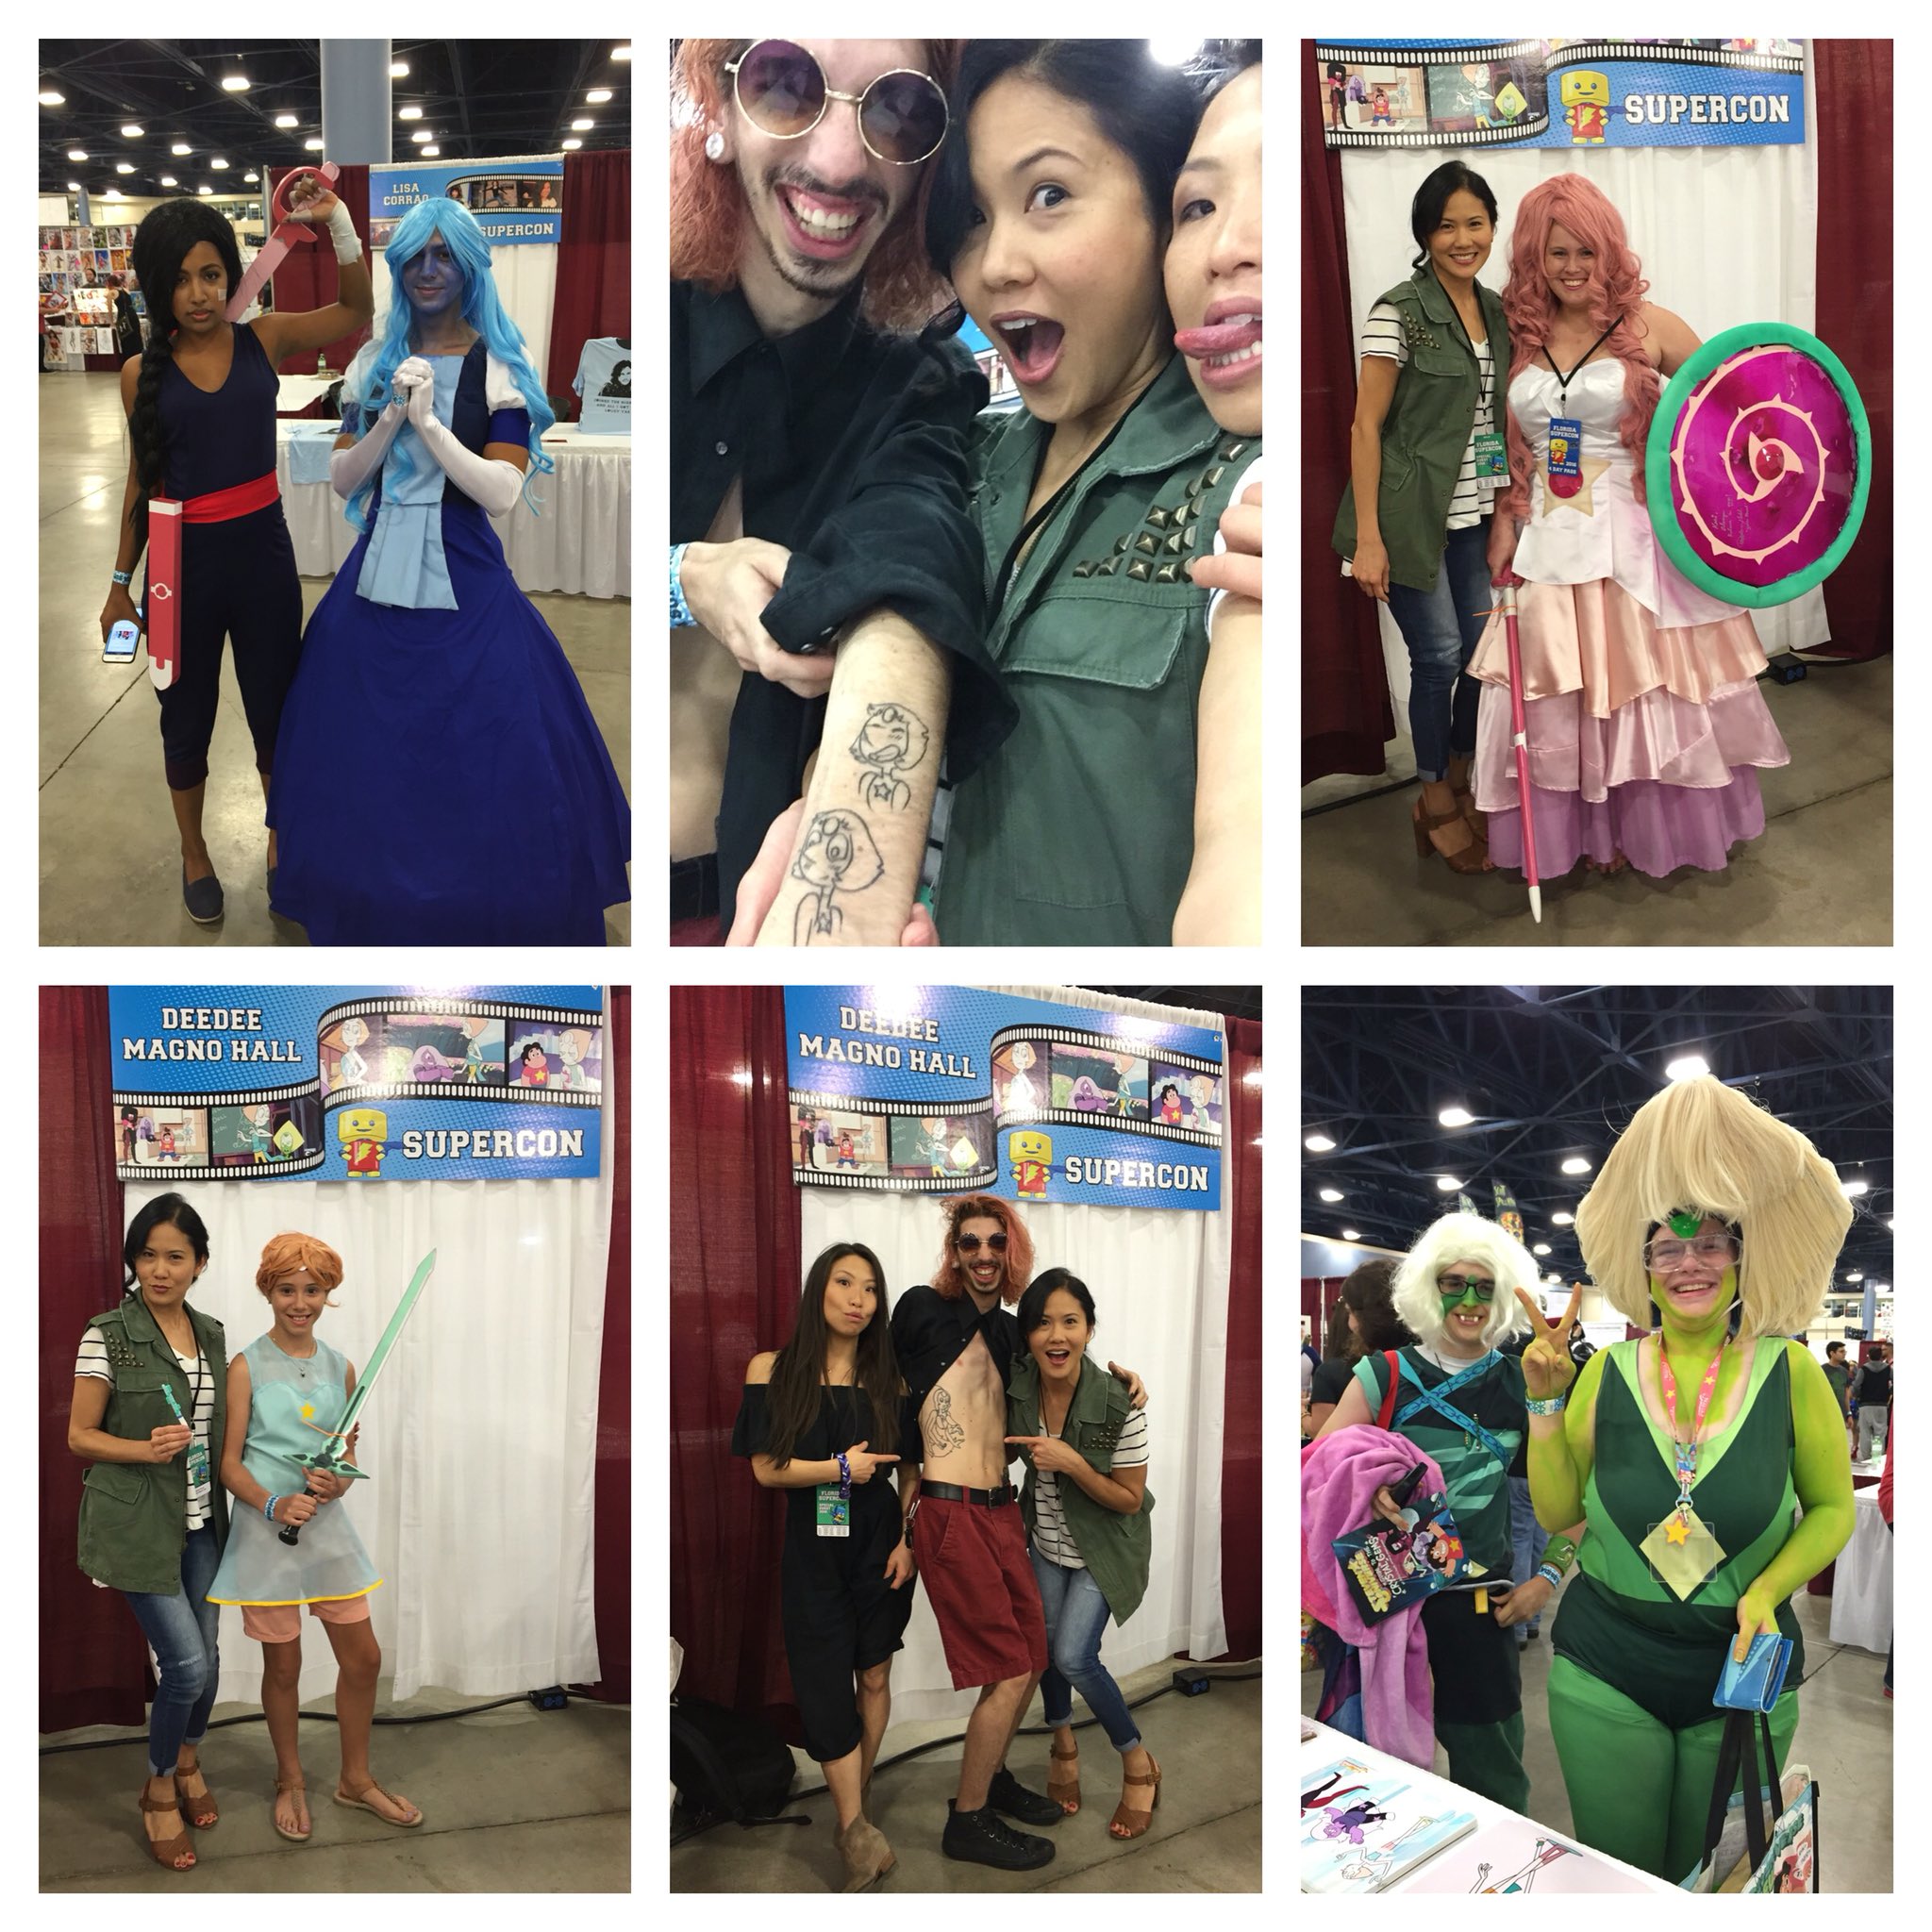 “A few highlights from 1st day @FloridaSupercon! Hope to see more #StevenUniverse #cosplay 2day! SU fans are amazing!”